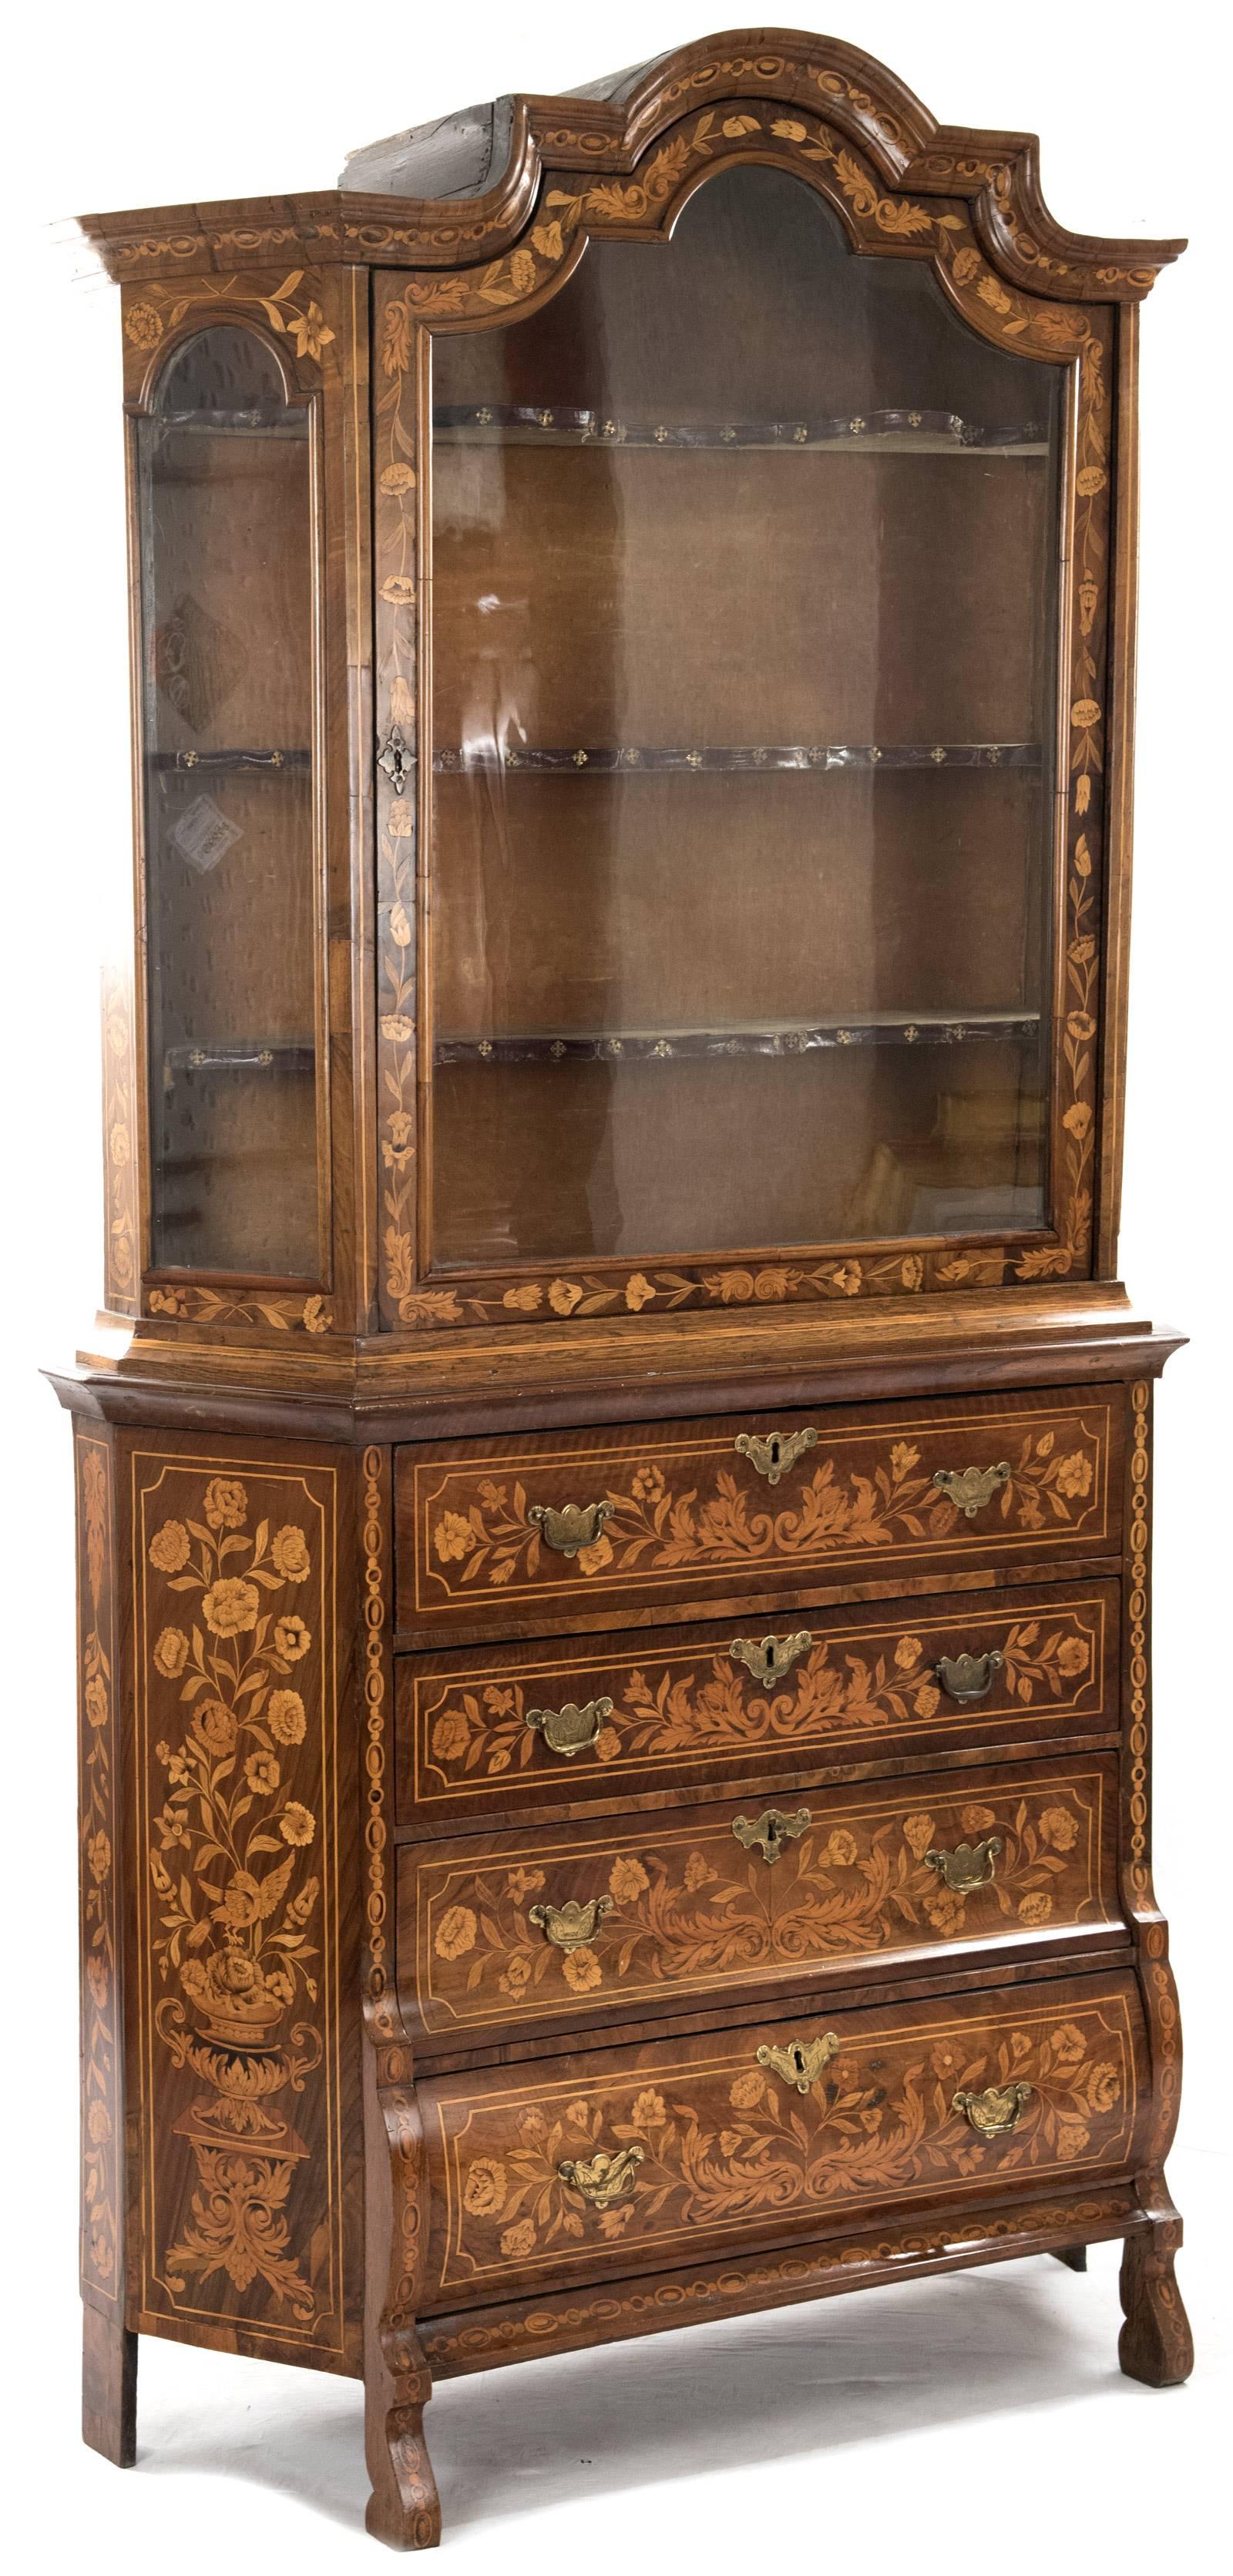 This 19th century Dutch marquetry inlaid cabinet has an upper case with a domed stepped cornice over a single glazed door and glazed canted corners, the interior fitted with three shaped shelves with leather-trimmed edges, all raised on a bombe-form